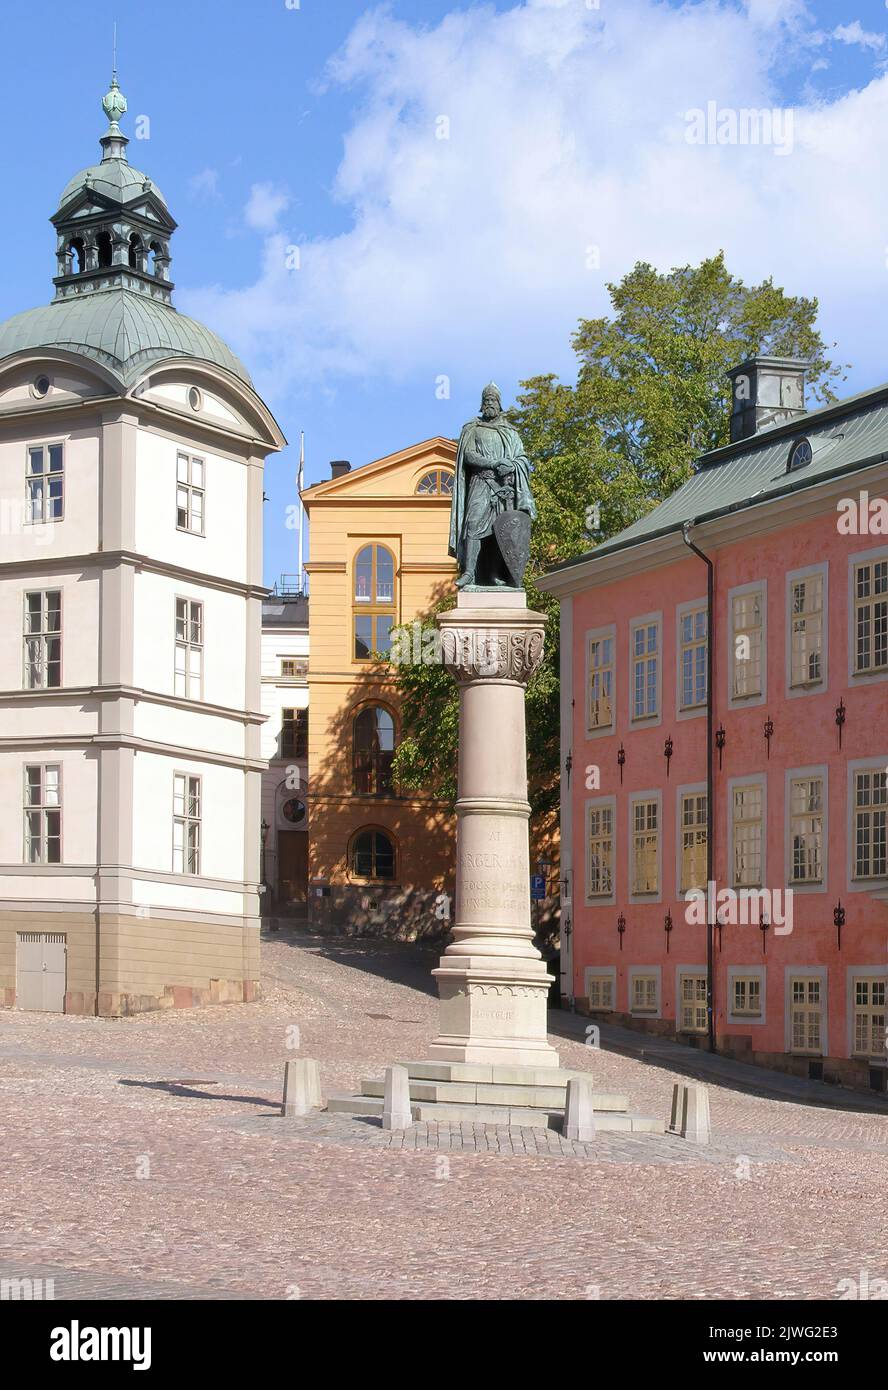 Birger Swedish ruler. The founder of Stockholm. monument in the city center near the temple. (3) Stock Photo